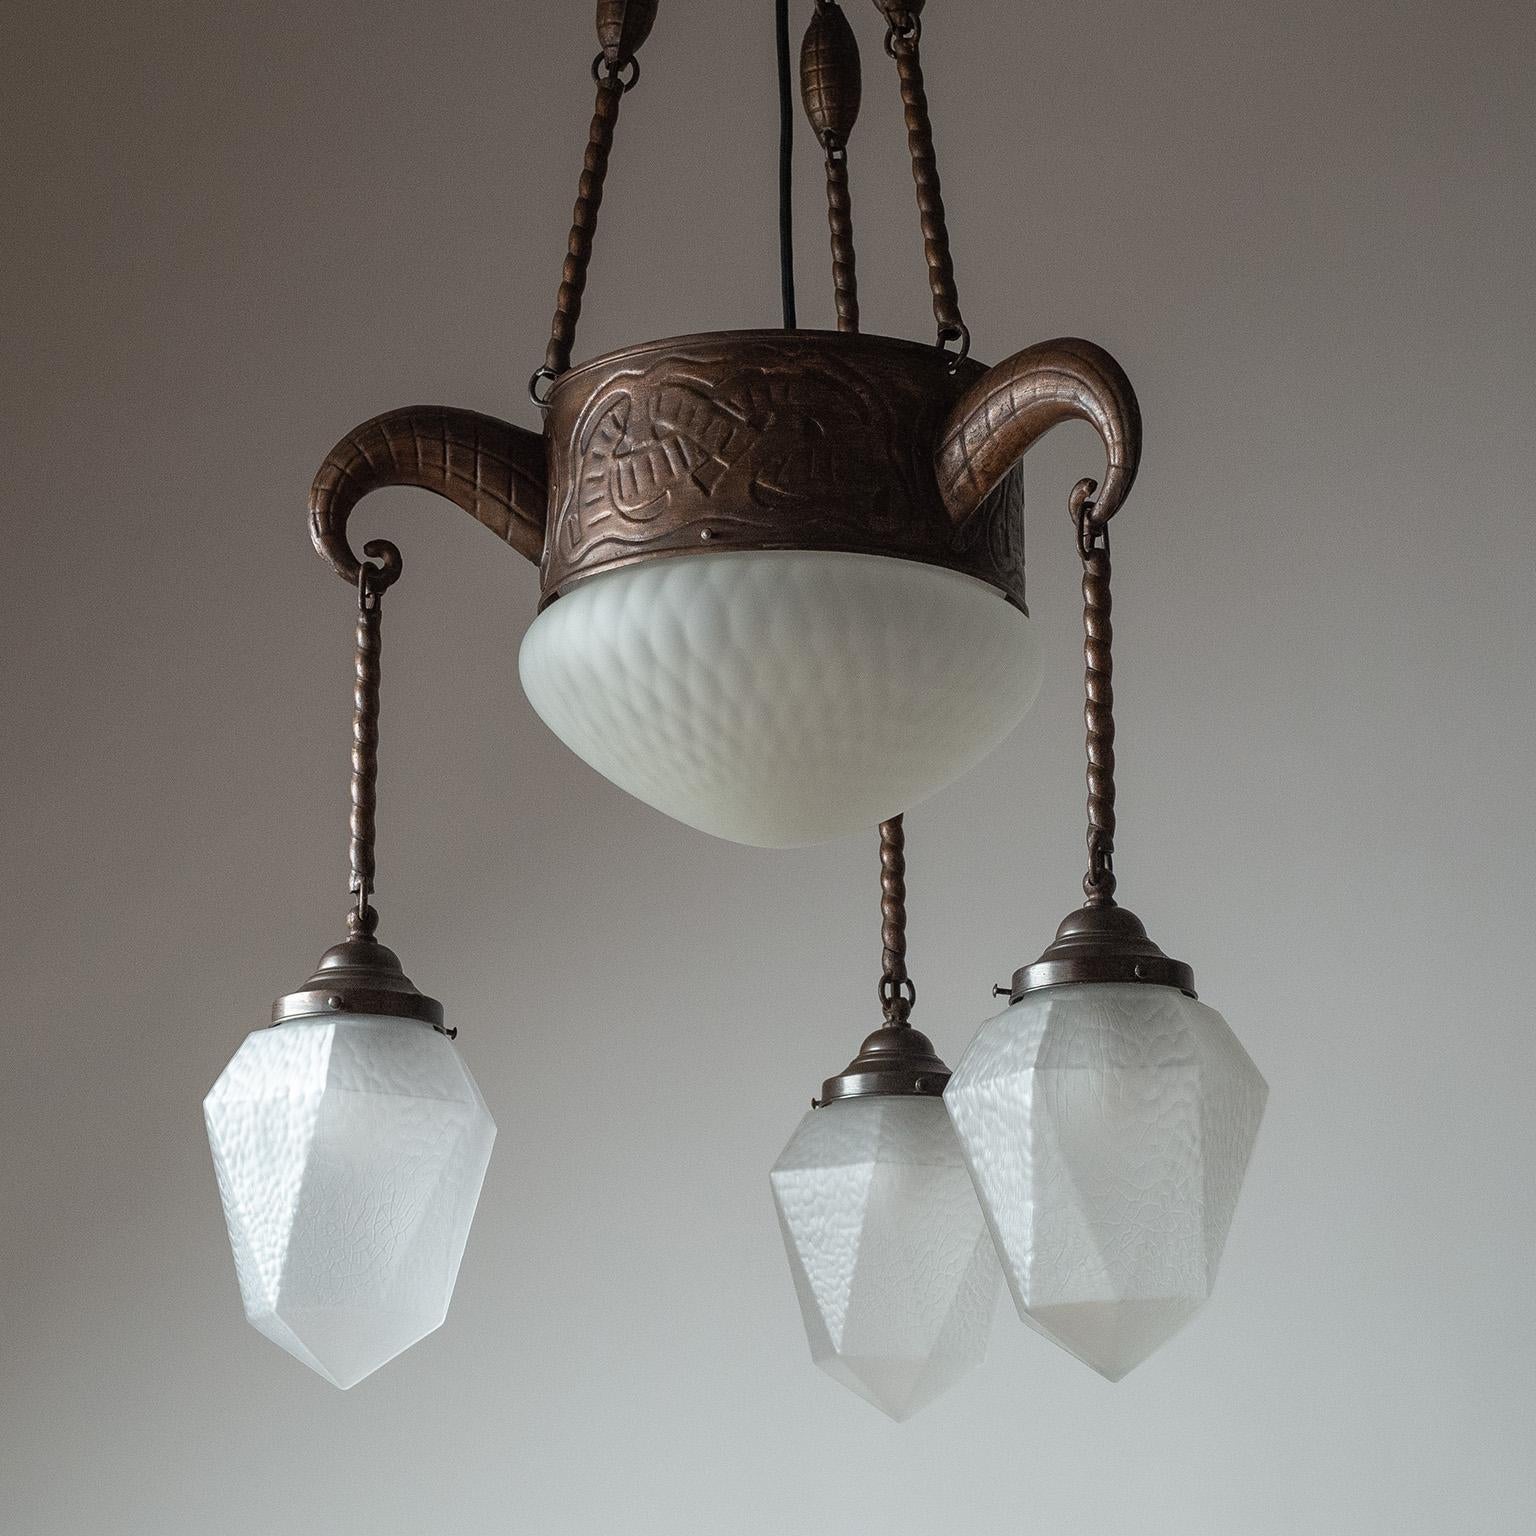 Copper and Satin Glass Chandelier, 1920s For Sale 1